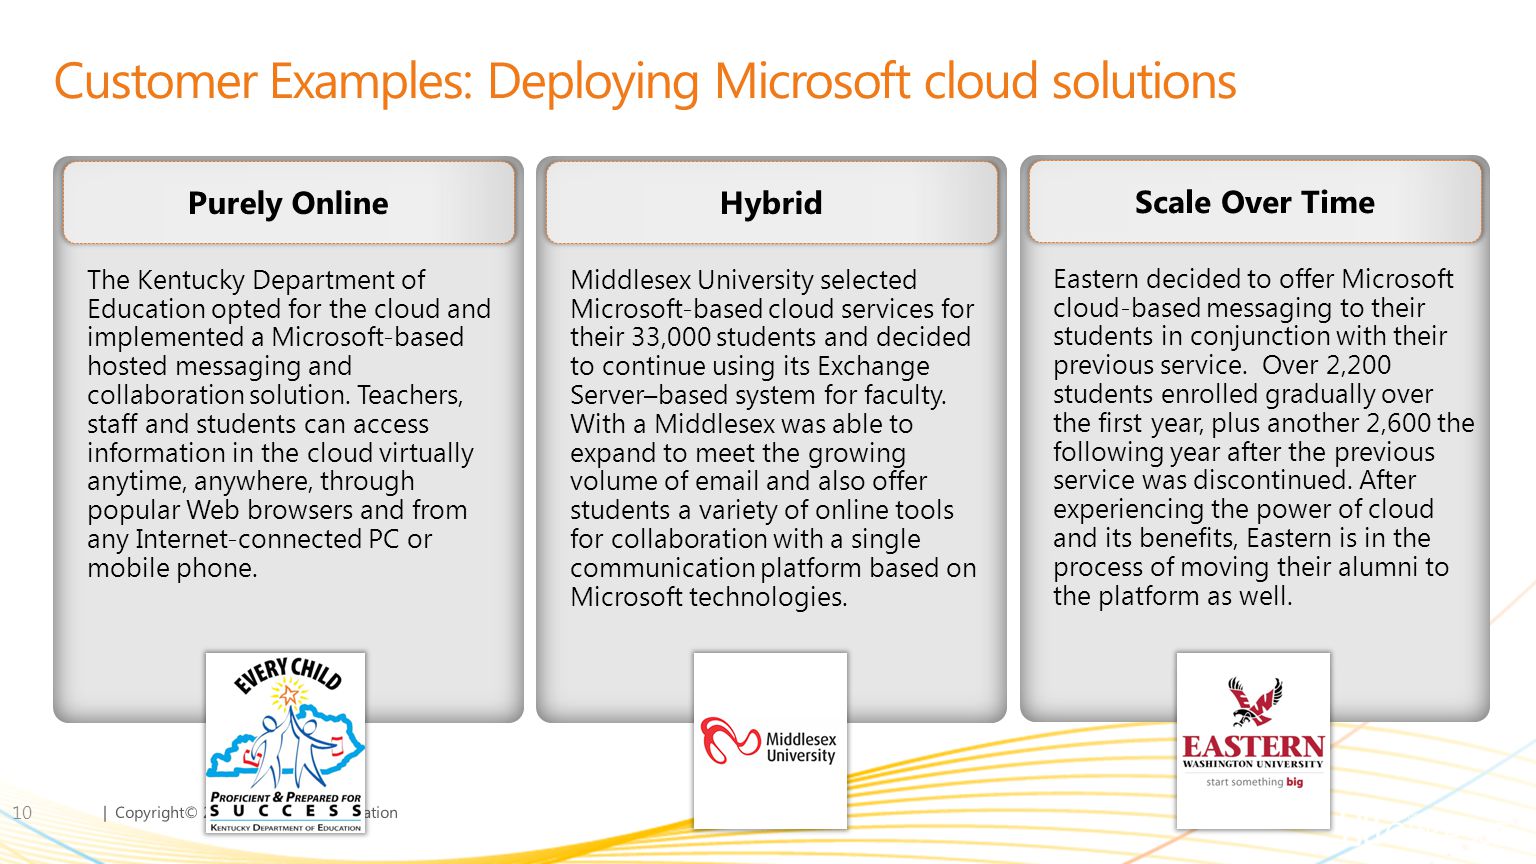 Customer Examples: Deploying Microsoft cloud solutions